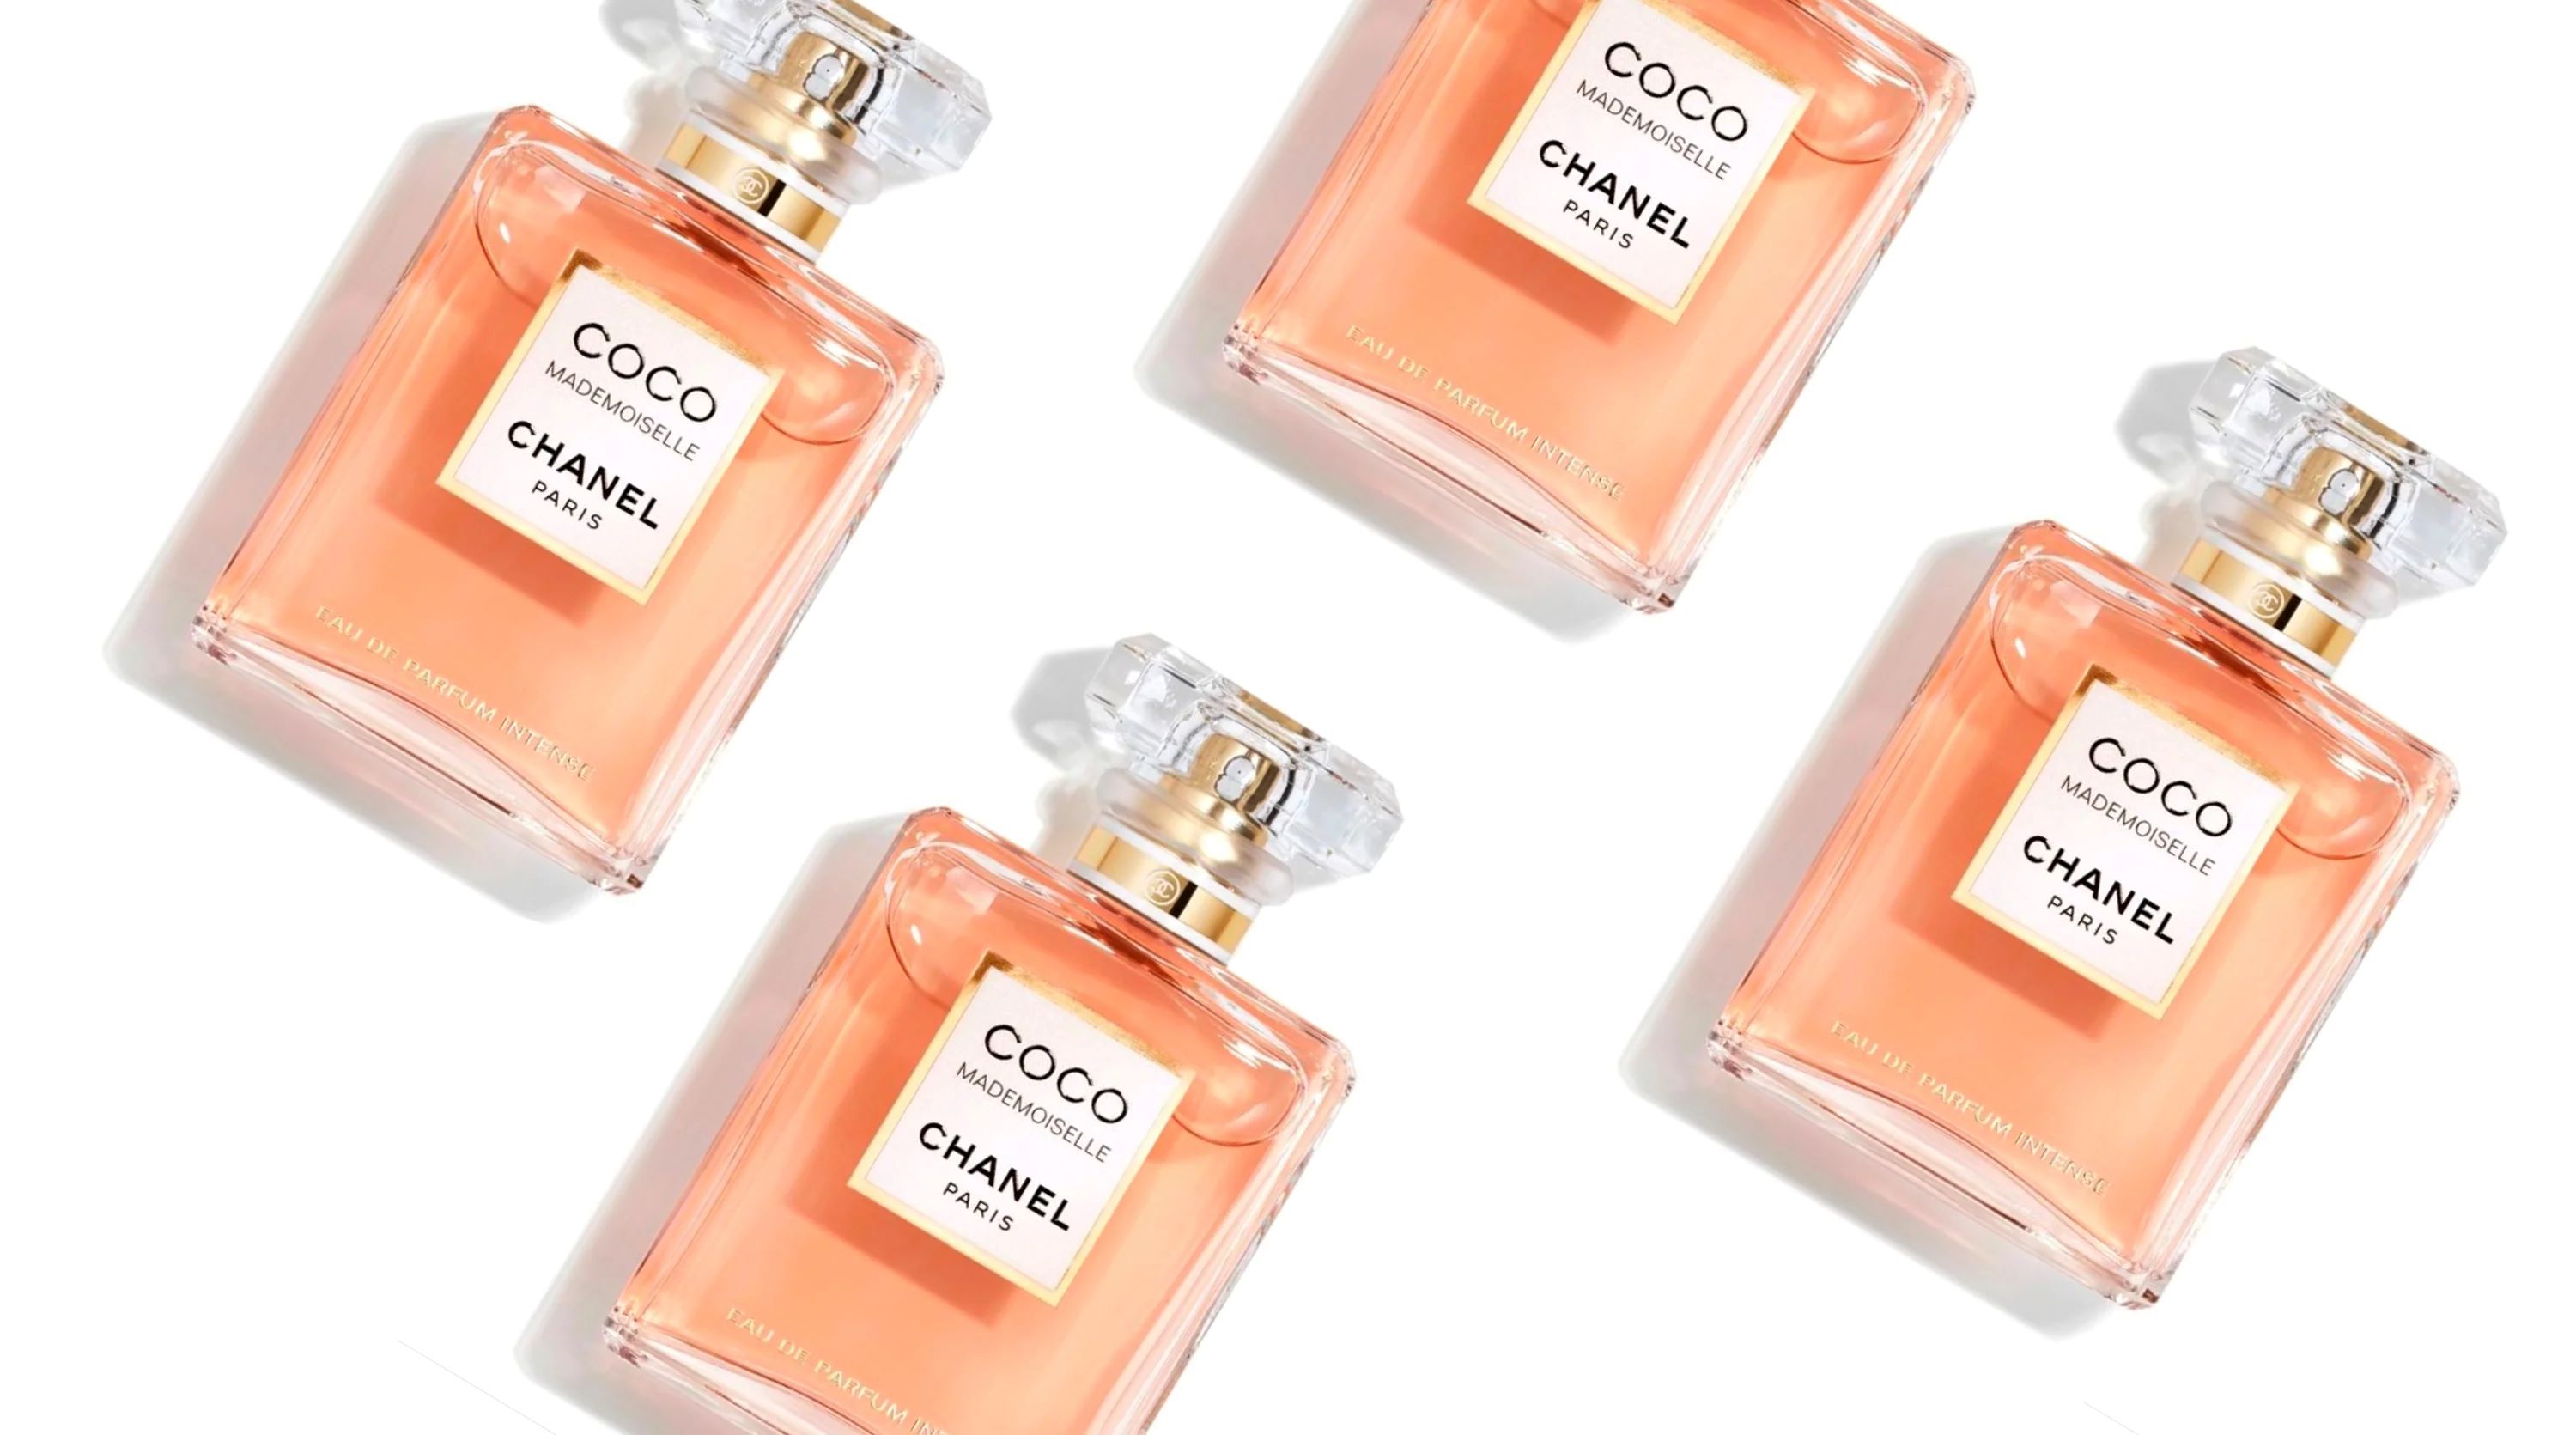 17-surprising-facts-about-coco-chanel-perfume-dossier-co